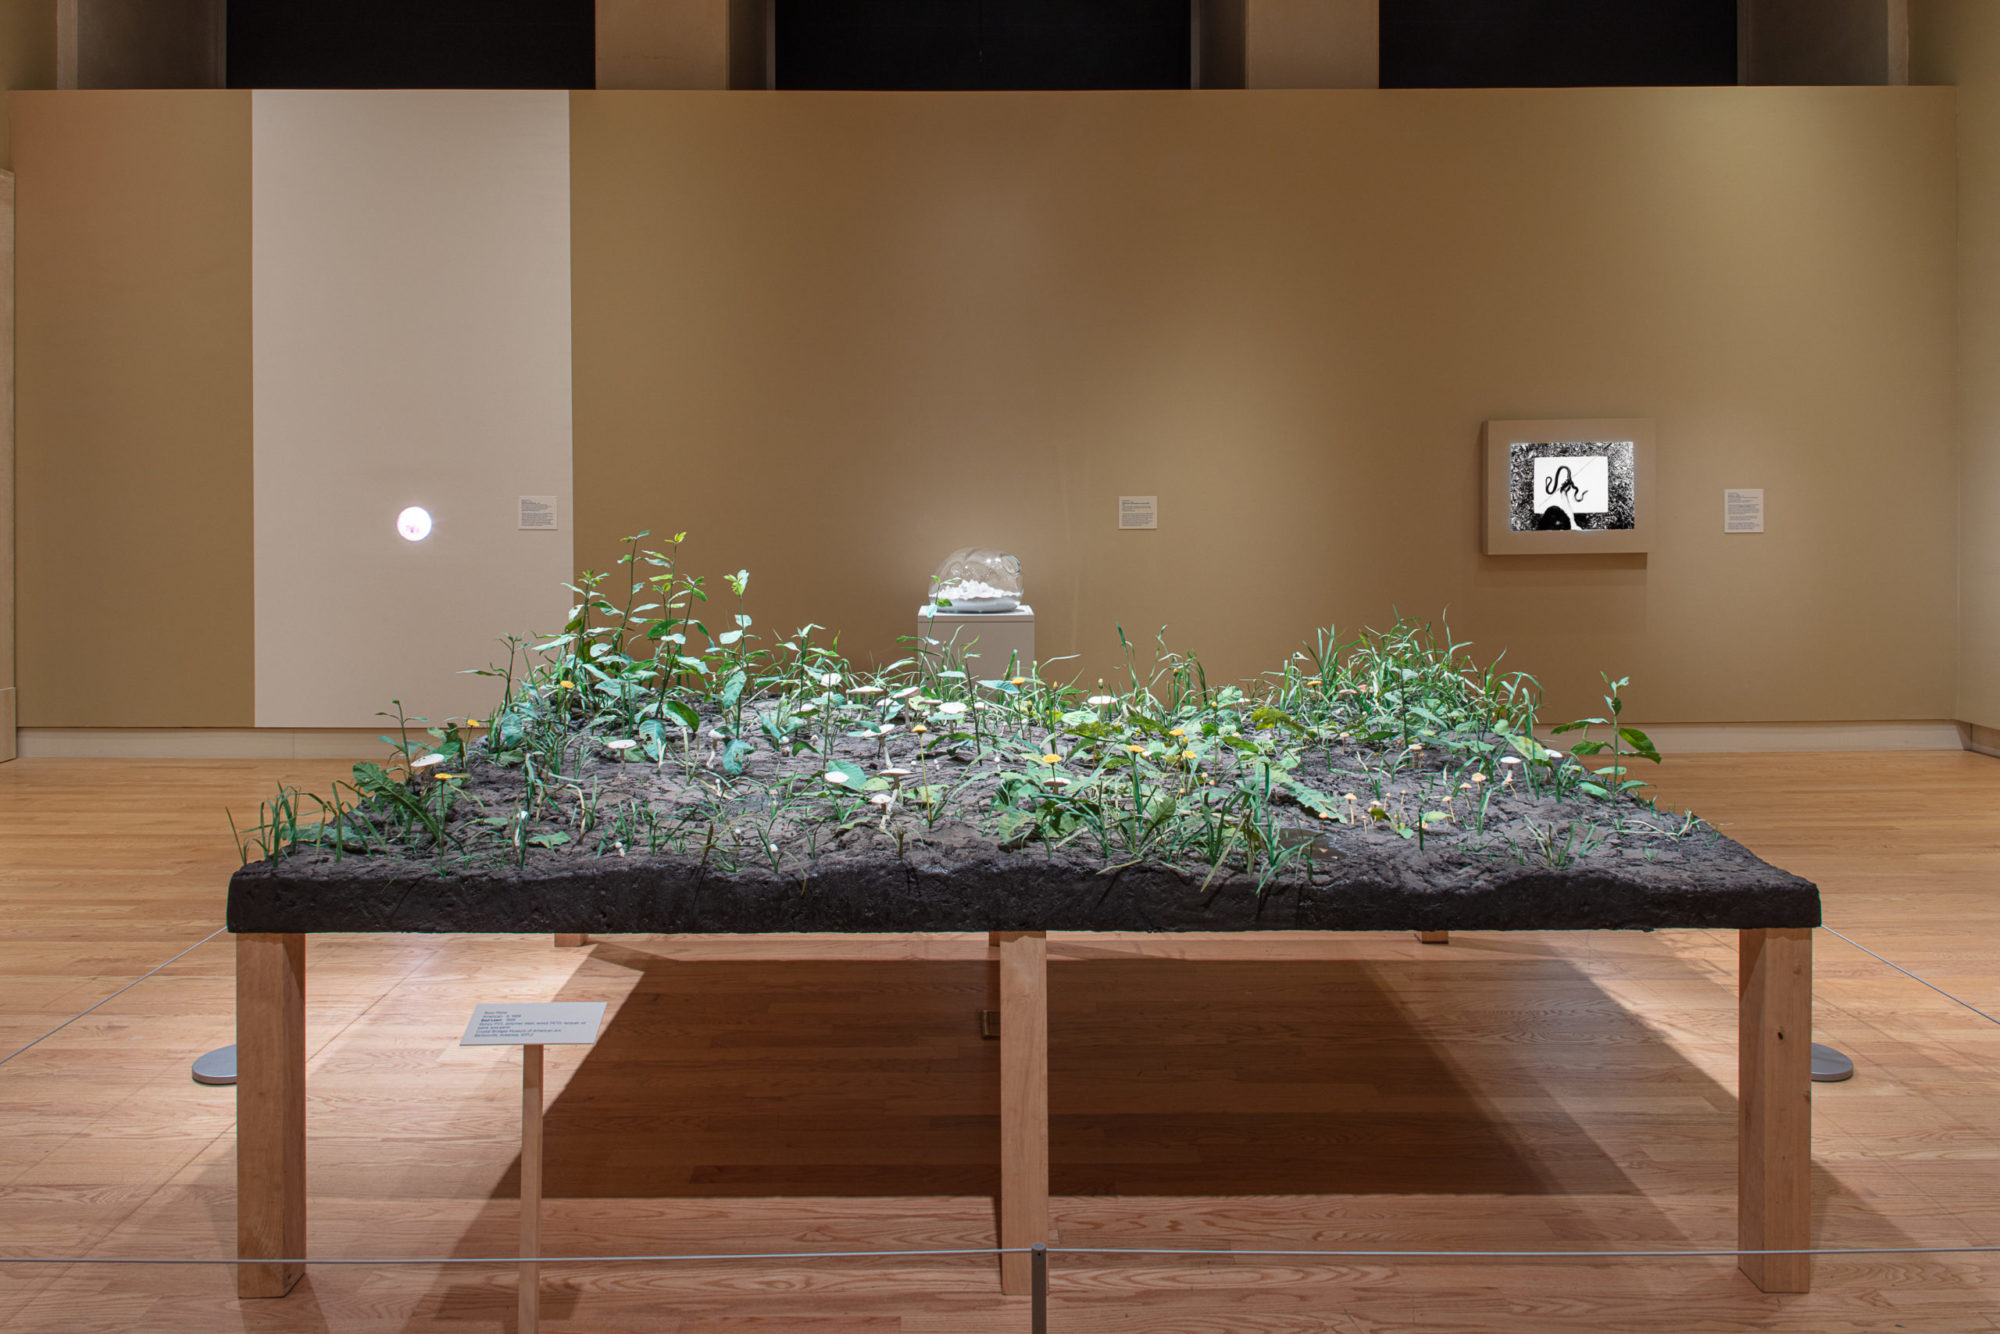 Installation view of exhibit that shows a table of brown soil covered in a collection of short green plants growing from the fake soil.